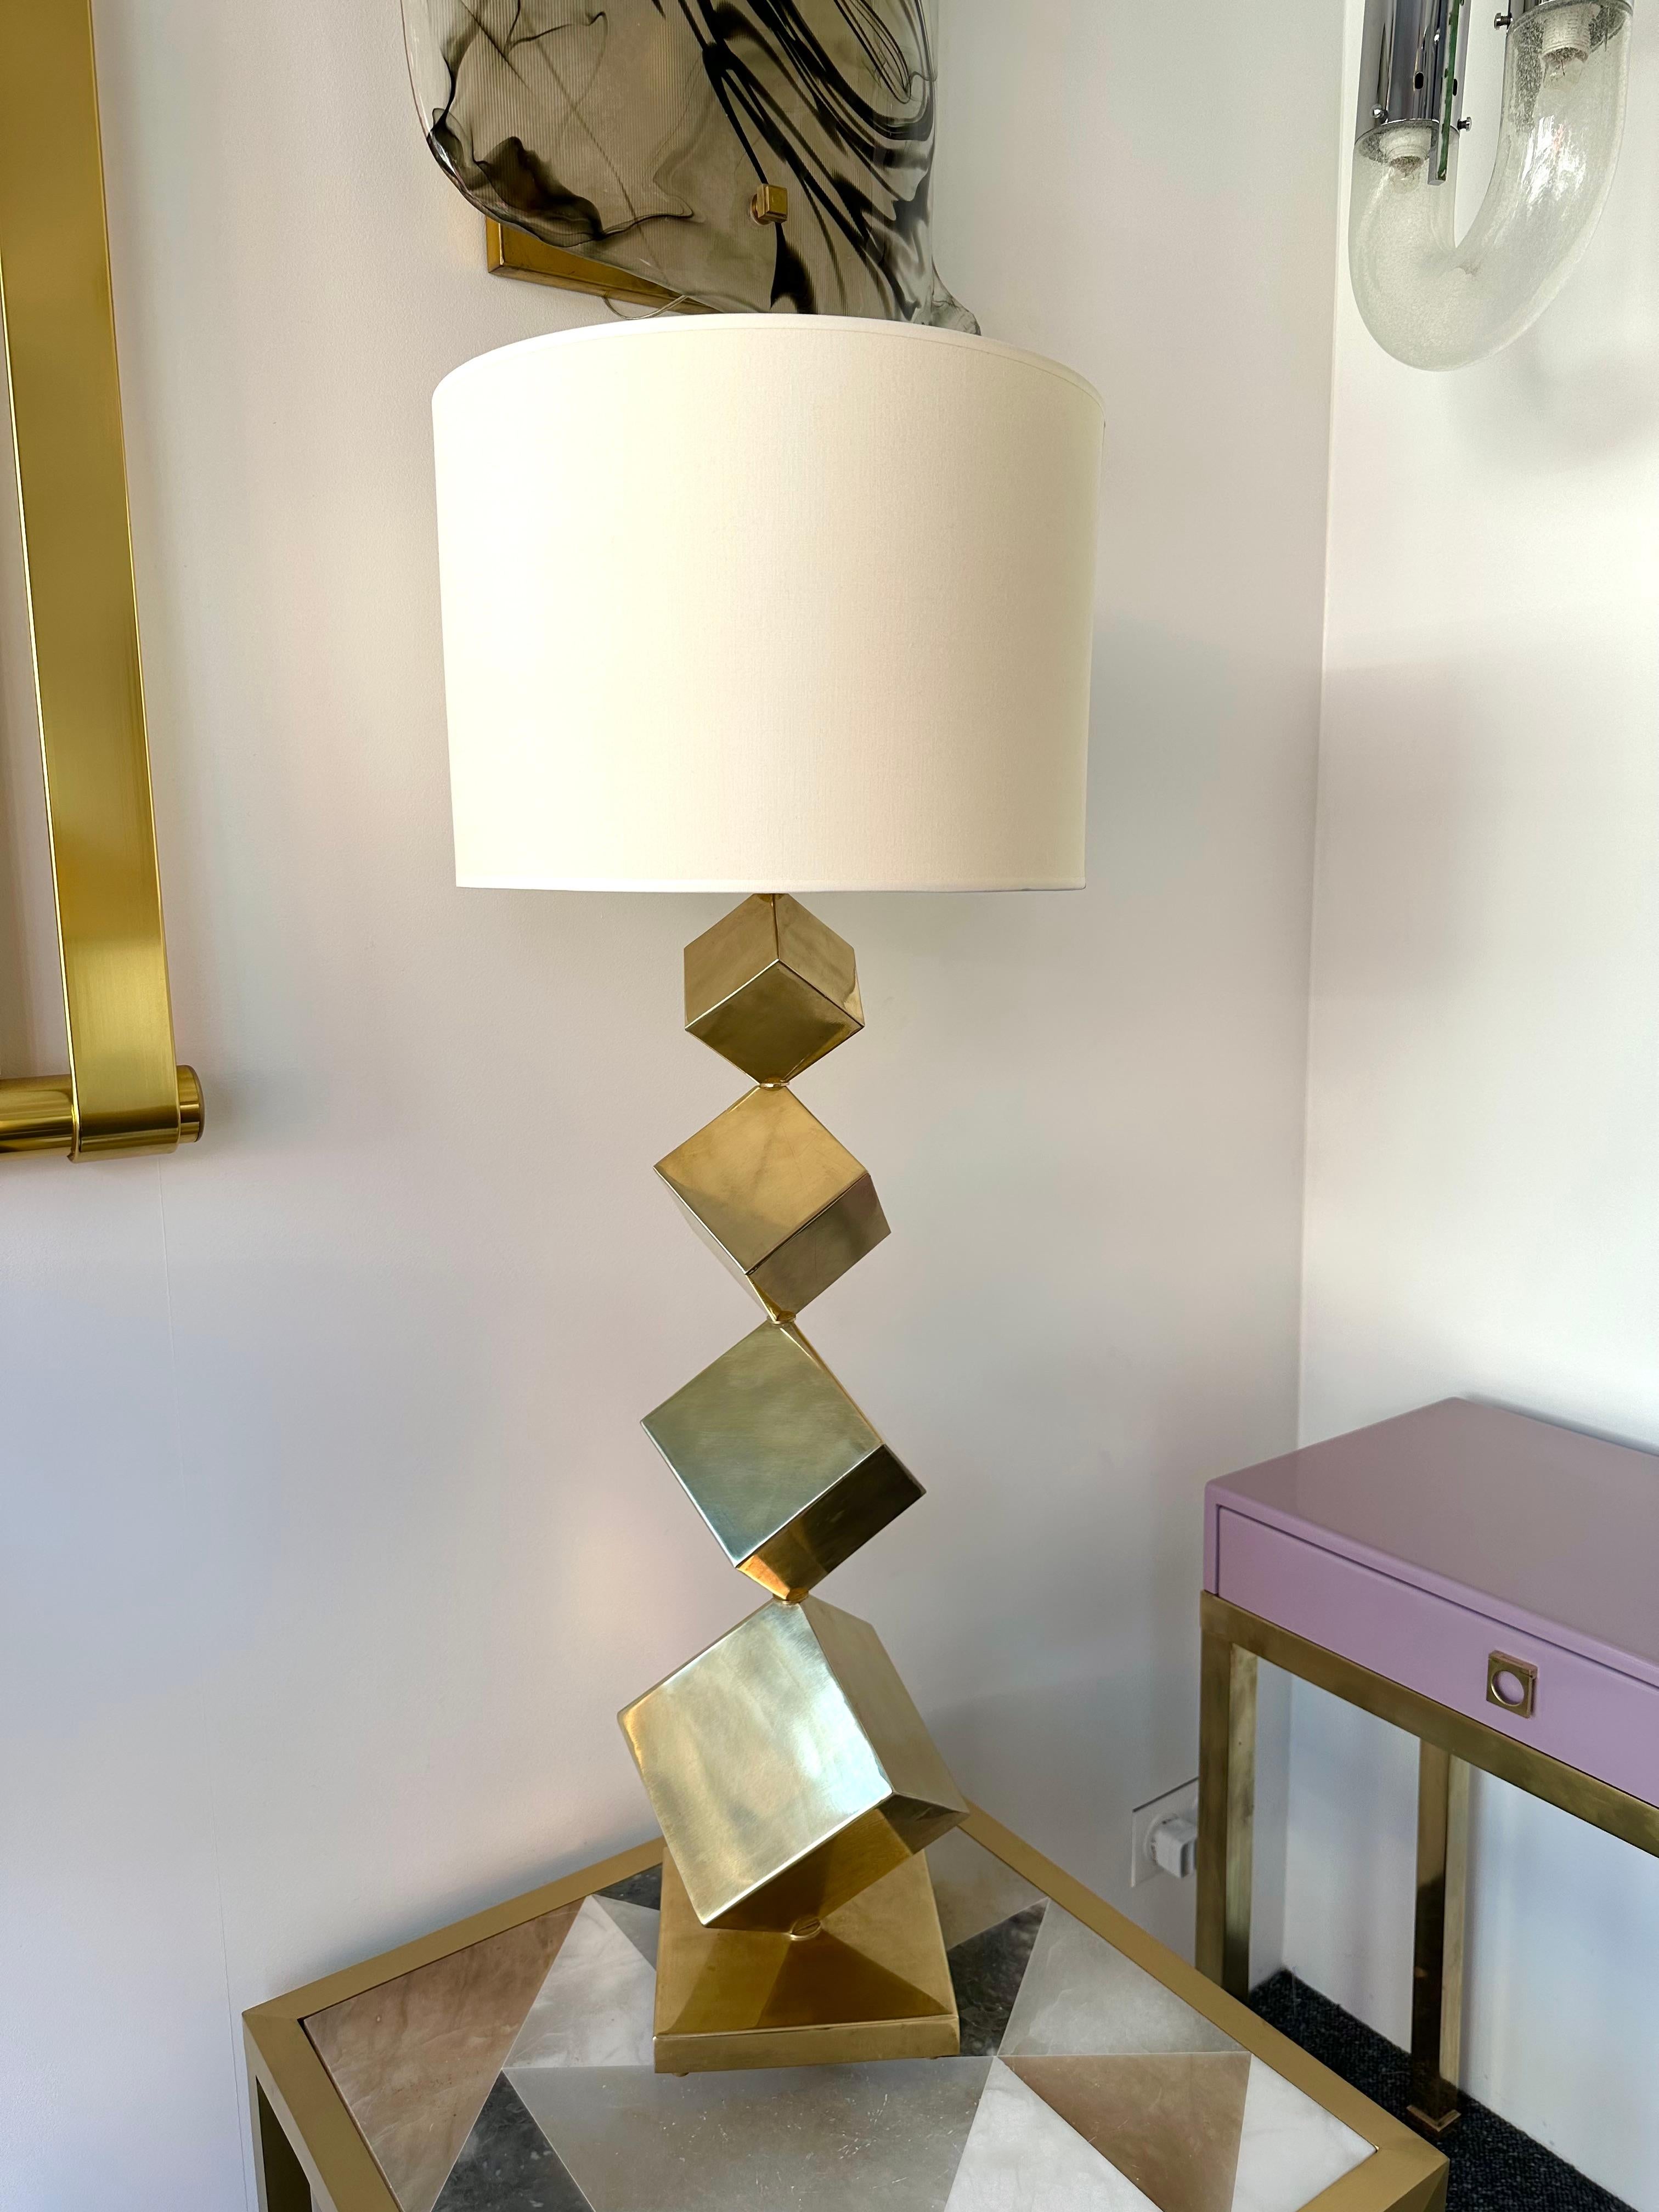 Pair of table or bedside brass dice cube column lamps. Contemporary work from a small italian artisanal workshop in a Mid-Century Modern Space Age Hollywood Regency mood.

Demo shades are not included
Measurements in description with demo